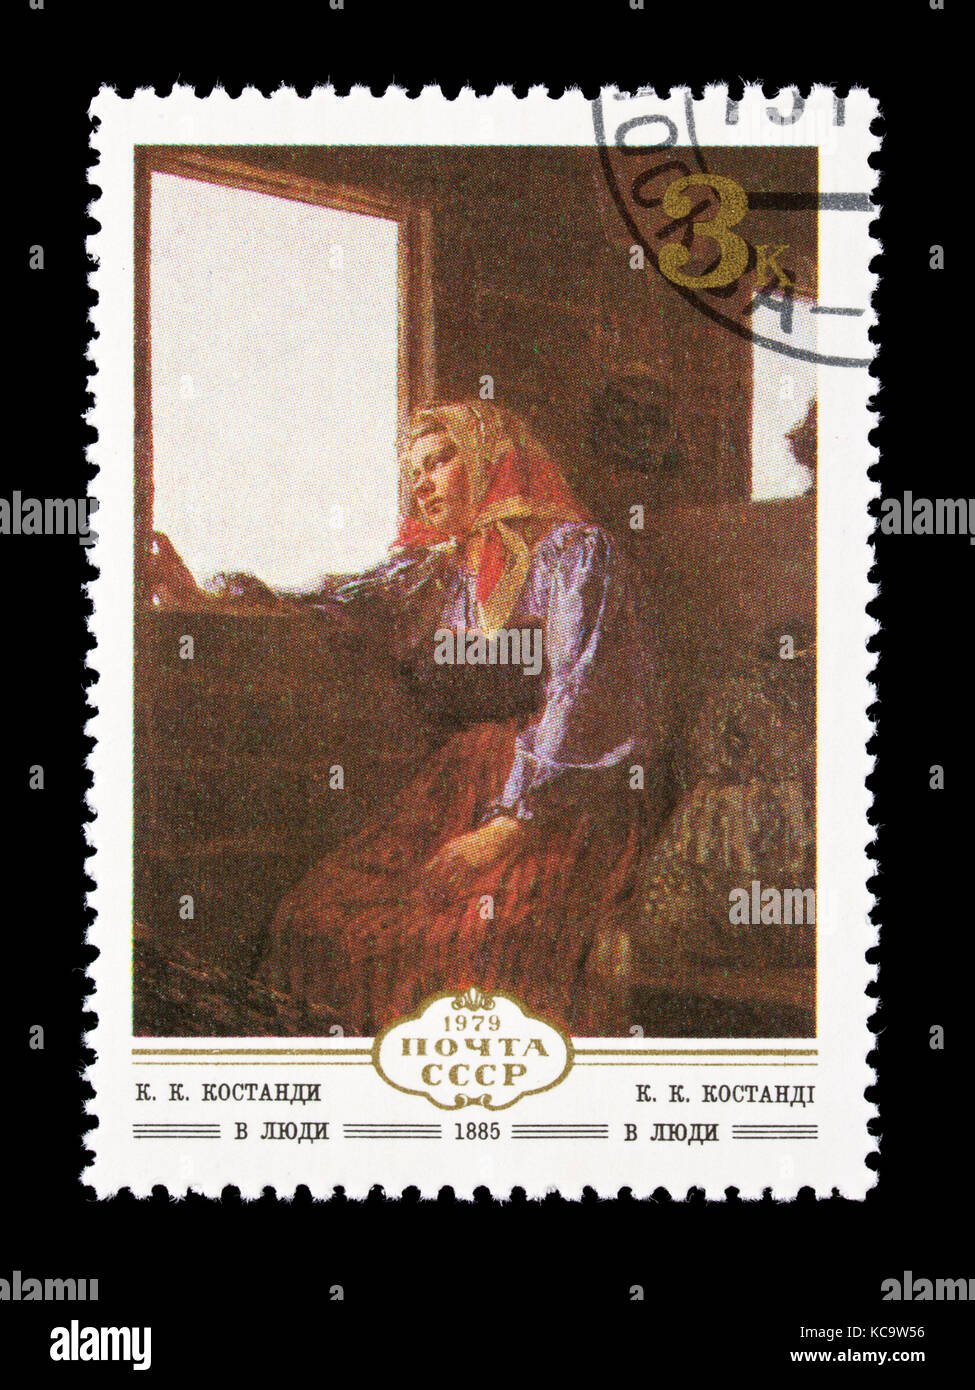 Postage stamp from the Soviet Union depicting the K. K. Kostandi painting Working Girl. Stock Photo